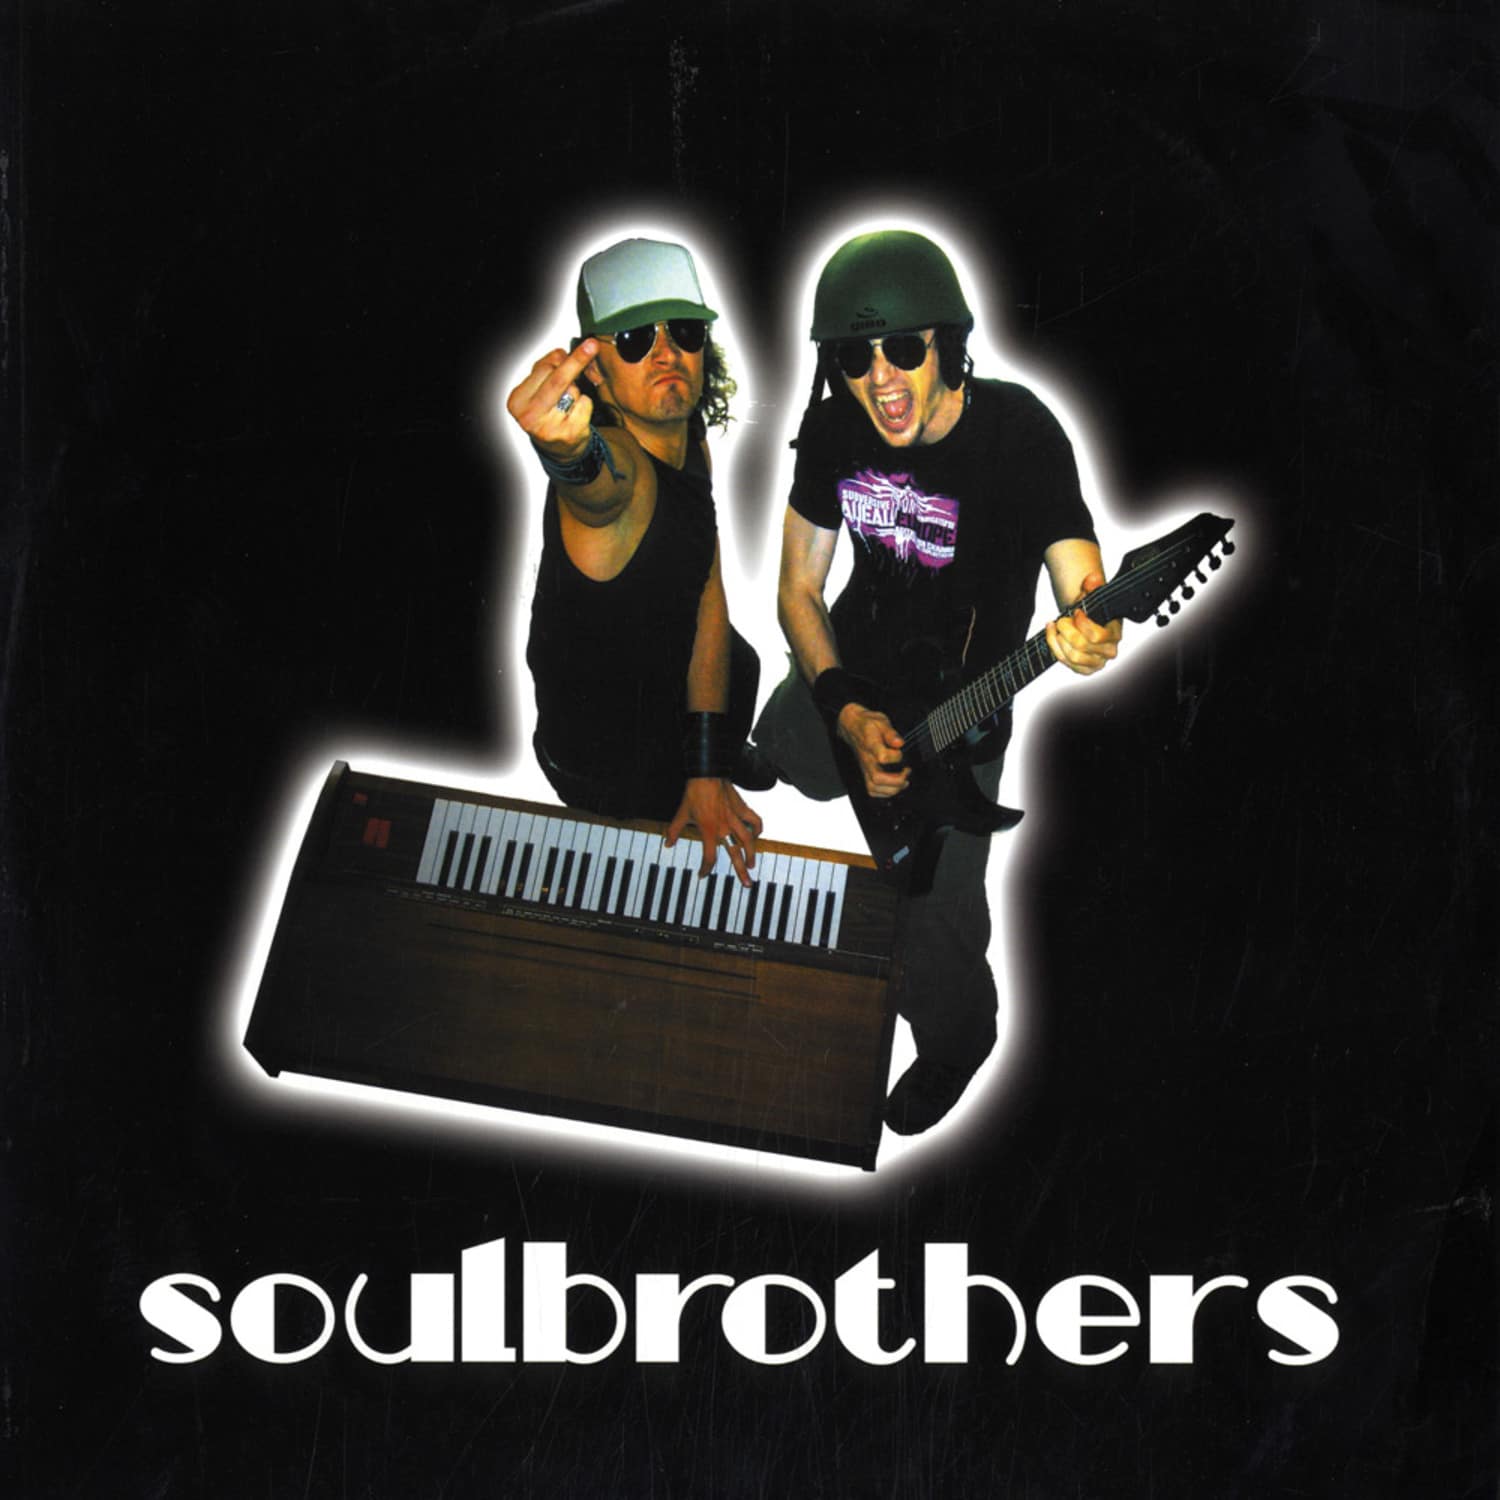 The Soulbrothers - AUDIO PROSTITUTION